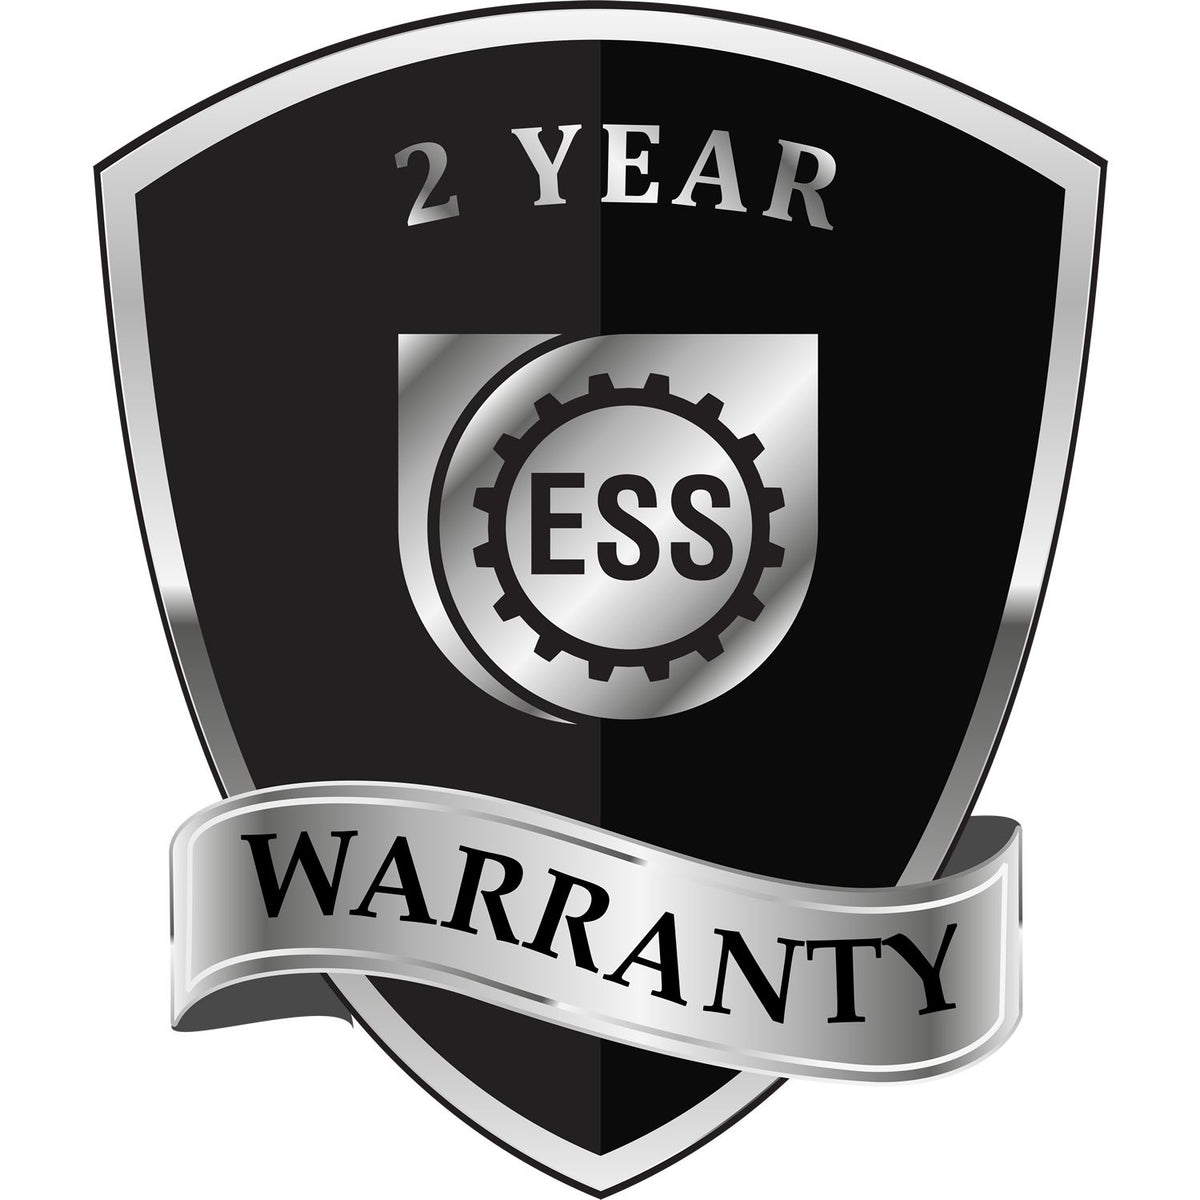 A black and silver badge or emblem showing warranty information for the Gift Ohio Landscape Architect Seal